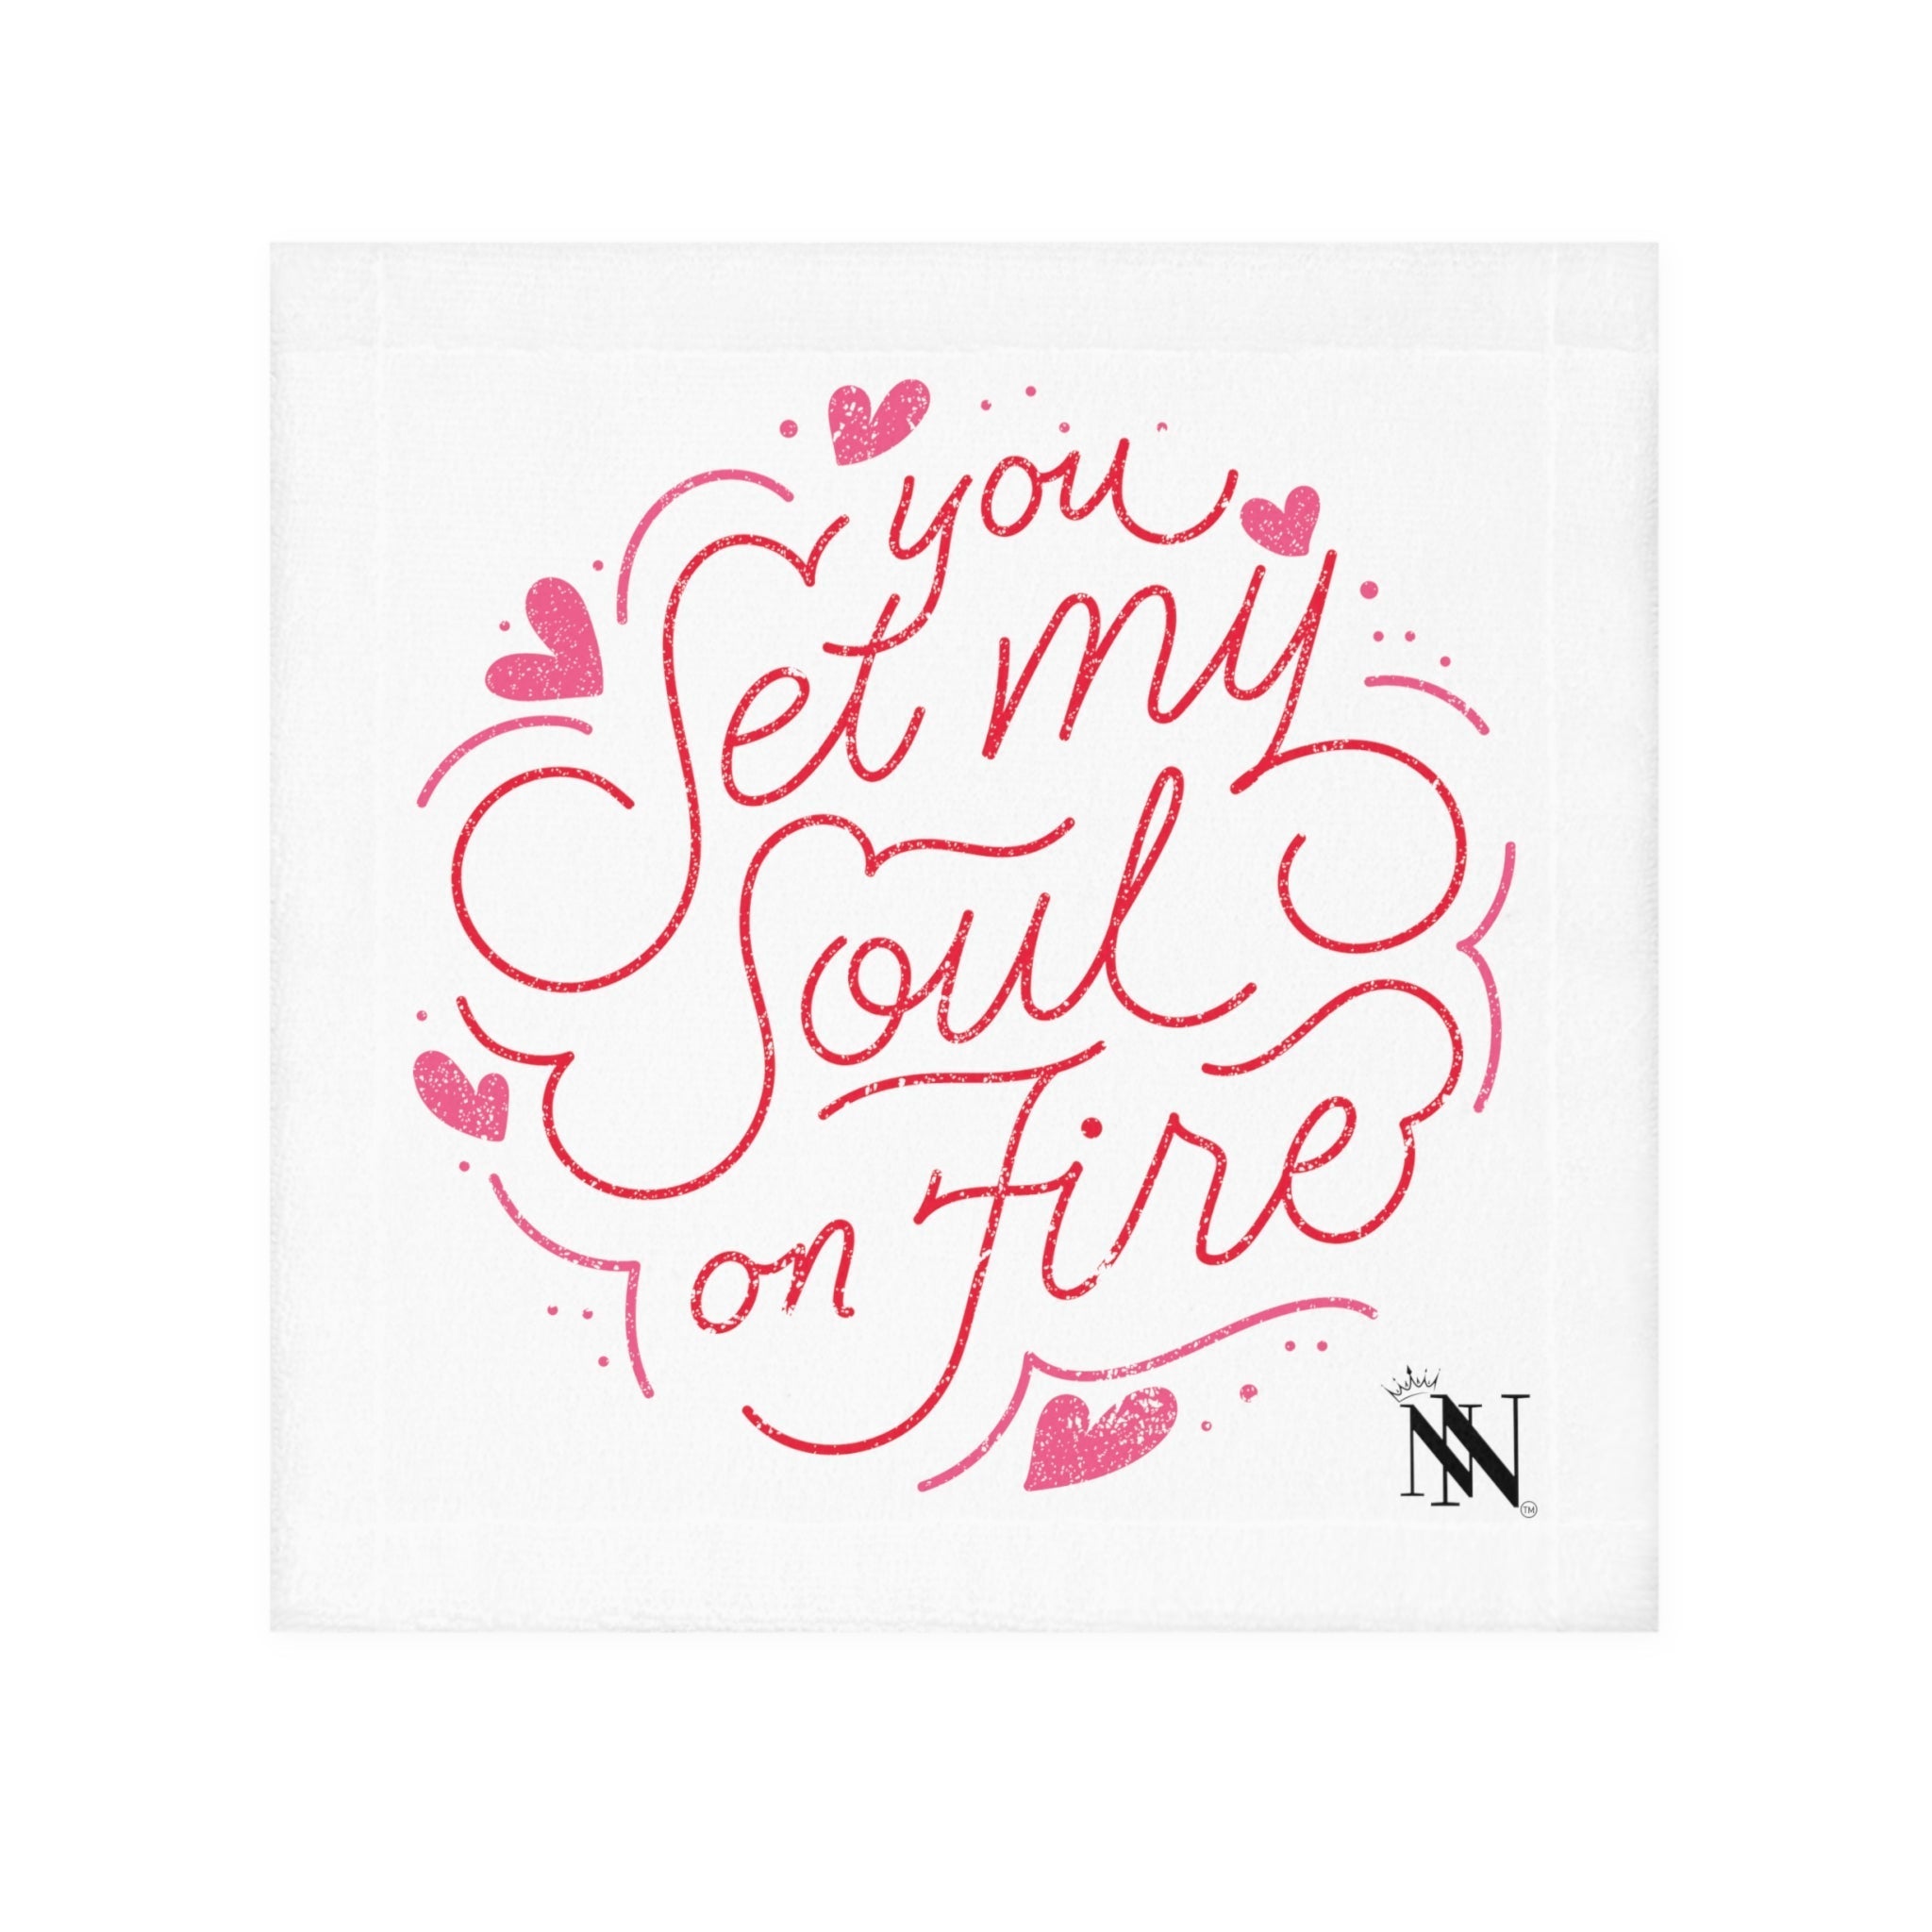 Lils' Soul Fire | Gifts for Boyfriend, Funny Towel Romantic Gift for Wedding Couple Fiance First Year Anniversary Valentines, Party Gag Gifts, Joke Humor Cloth for Husband Men BF NECTAR NAPKINS